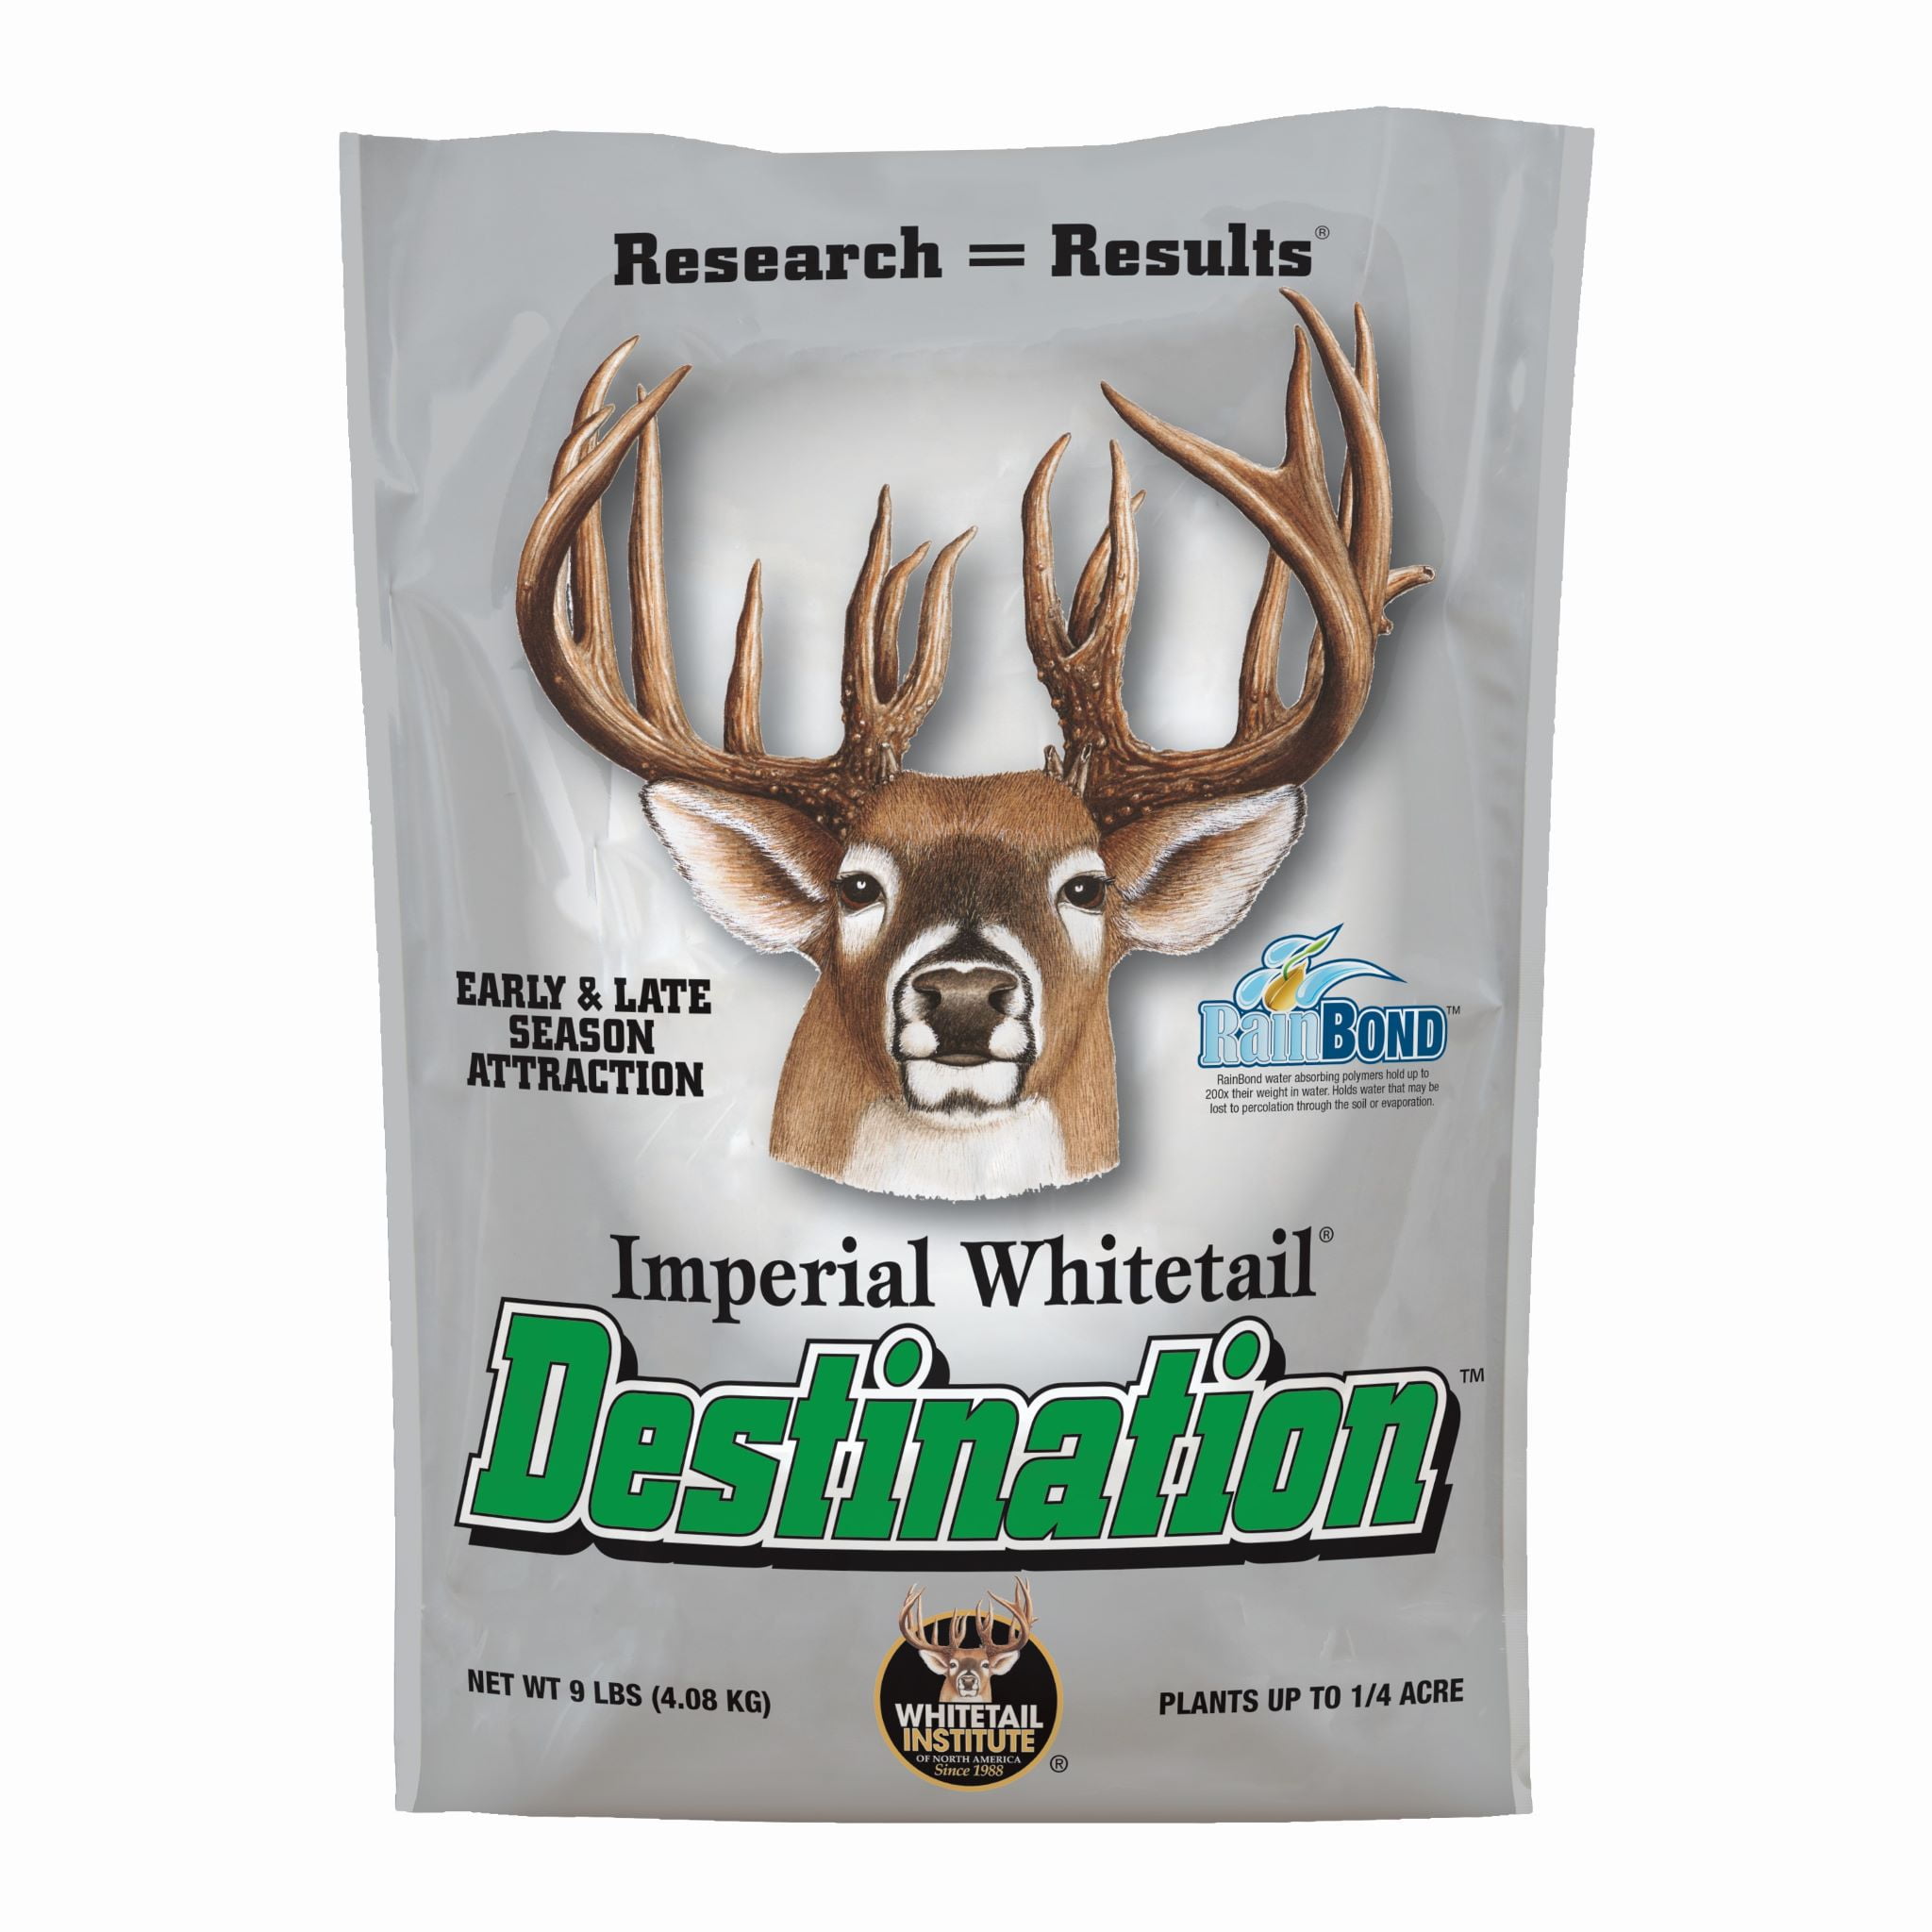 Whitetail Institute Imperial Extreme Perennial Deer Food Plot Seed 23 Pound Bag 